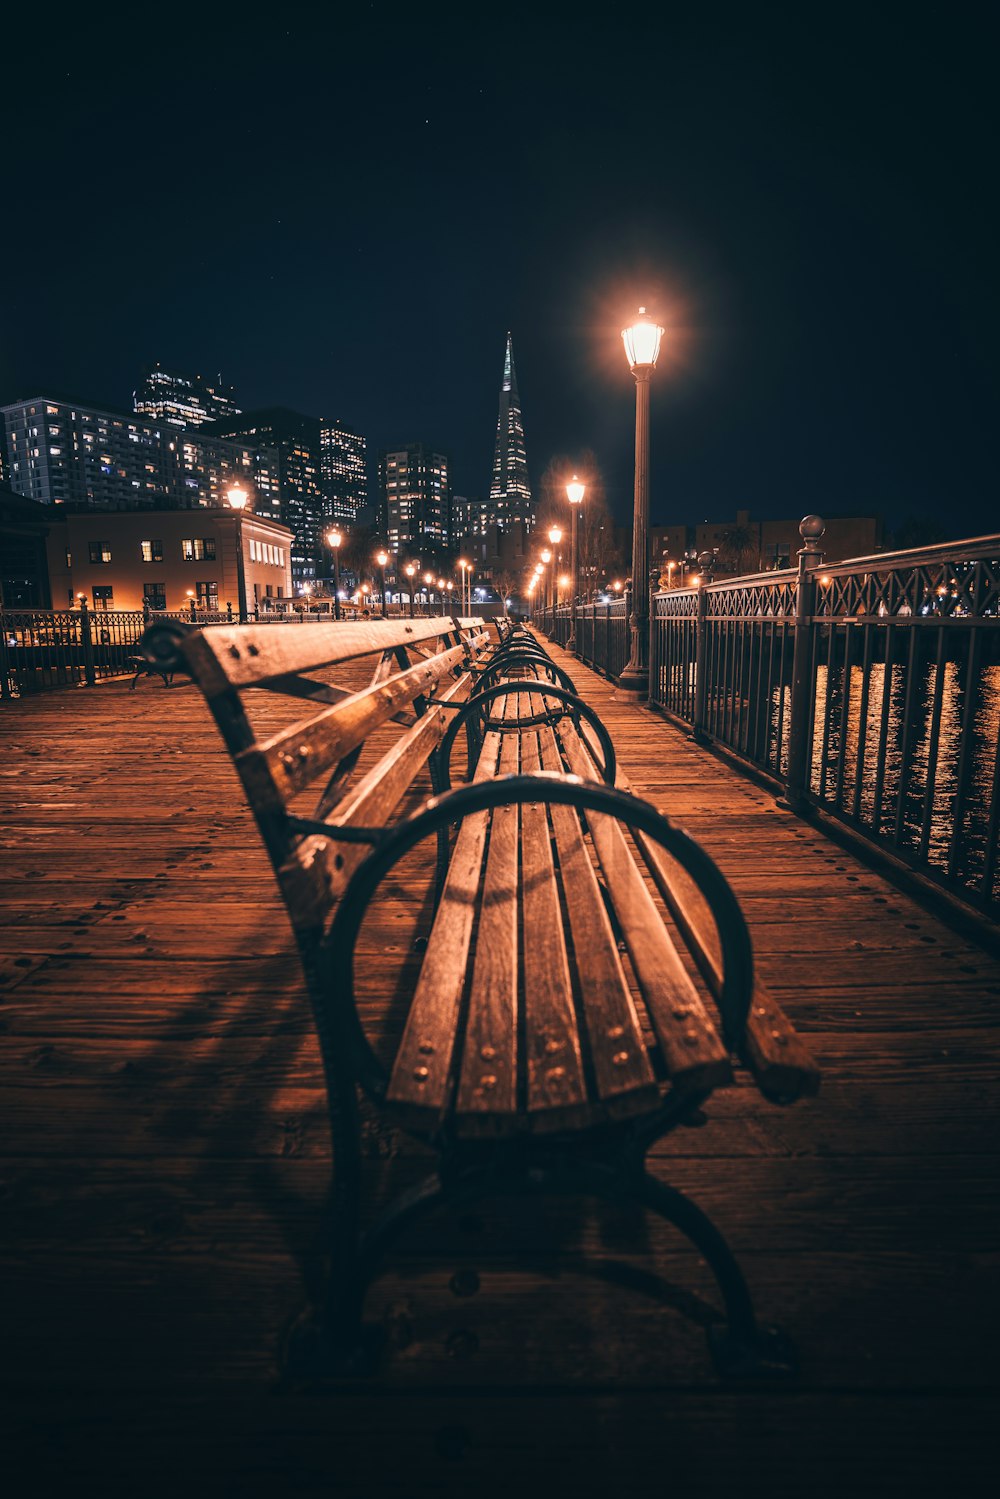 a row of benches sitting on top of a wooden pier